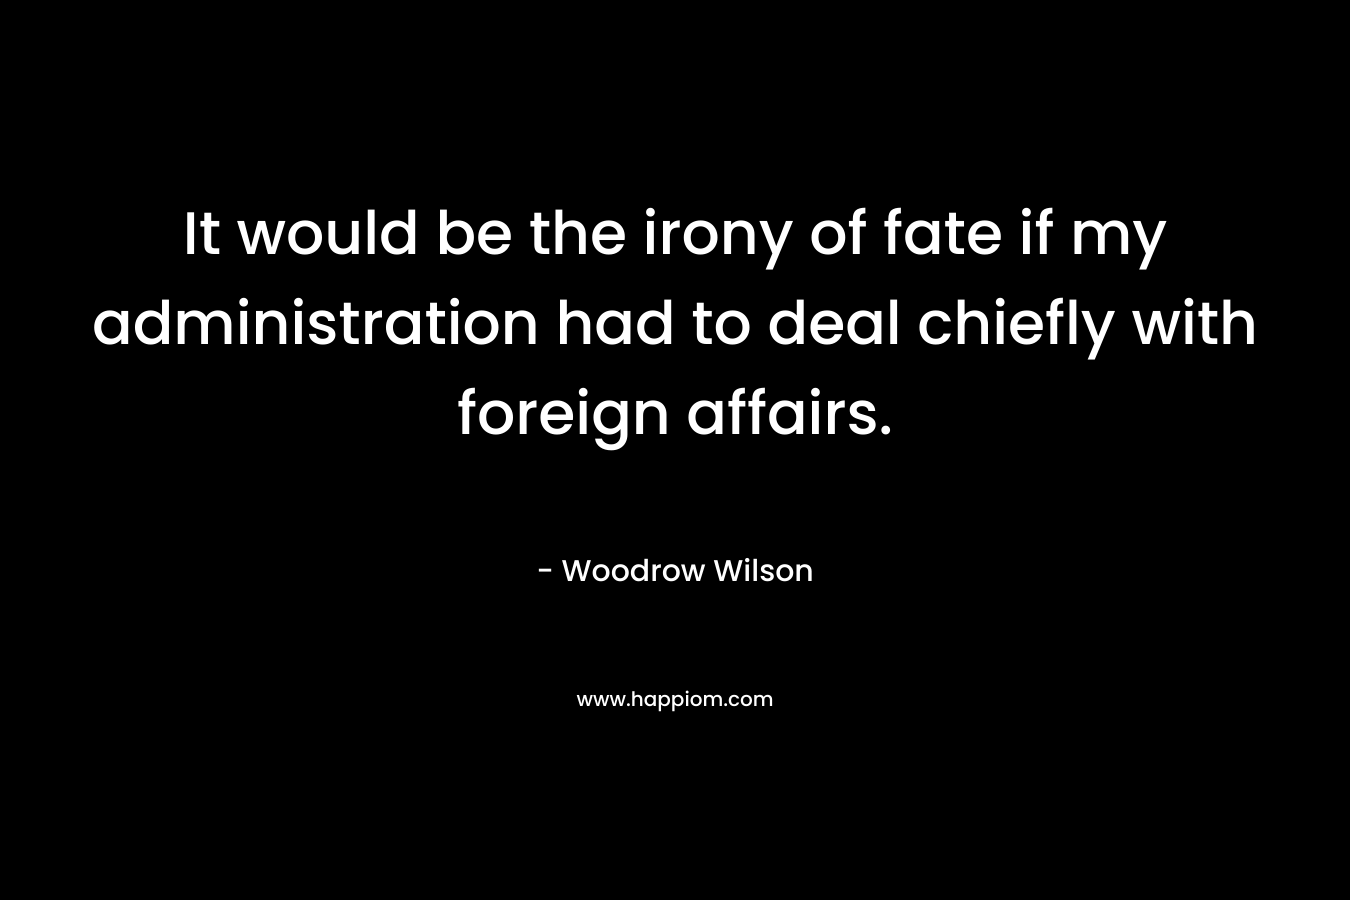 It would be the irony of fate if my administration had to deal chiefly with foreign affairs. – Woodrow Wilson